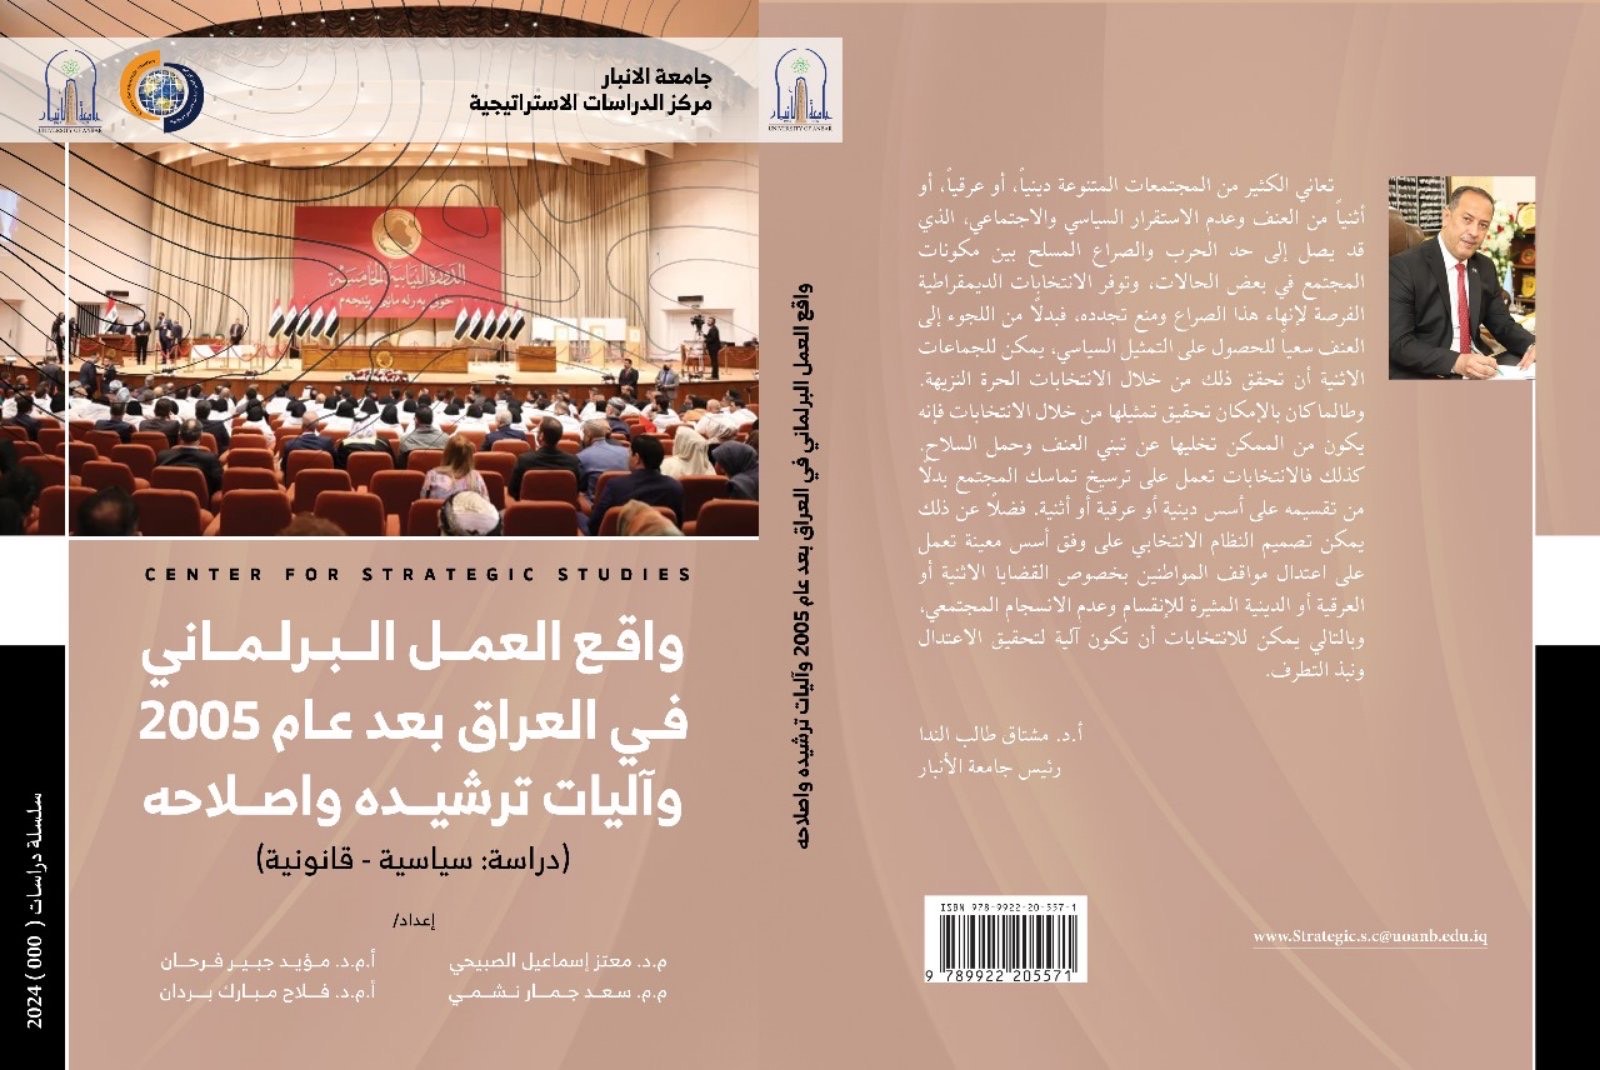 The center's publications (a political-legal analysis of the procedures for rationalizing and reforming legislative functioning in Iraq after 2005)